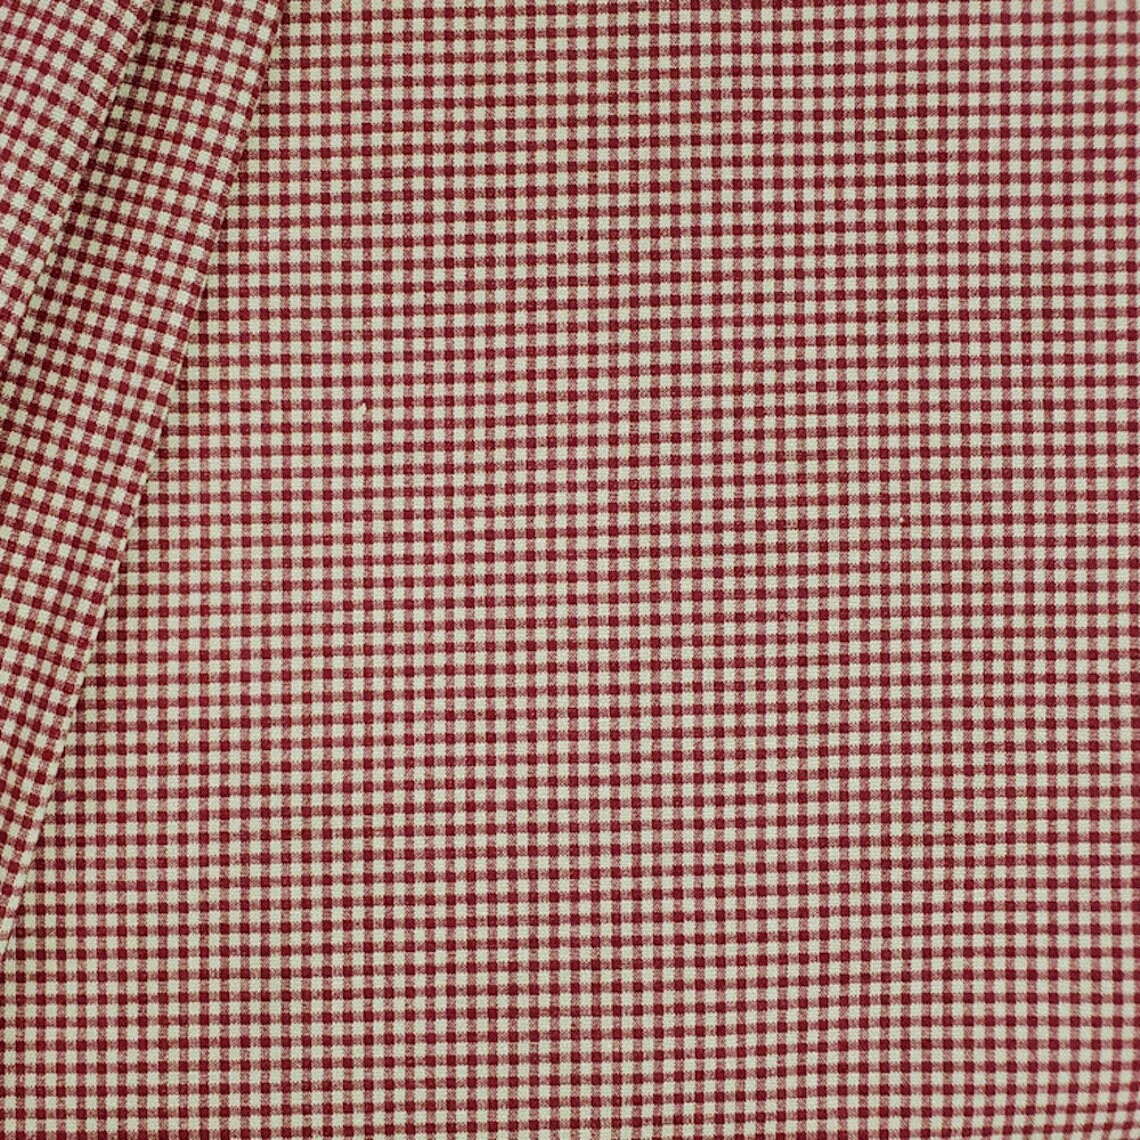 bed scarf in farmhouse red gingham check on beige